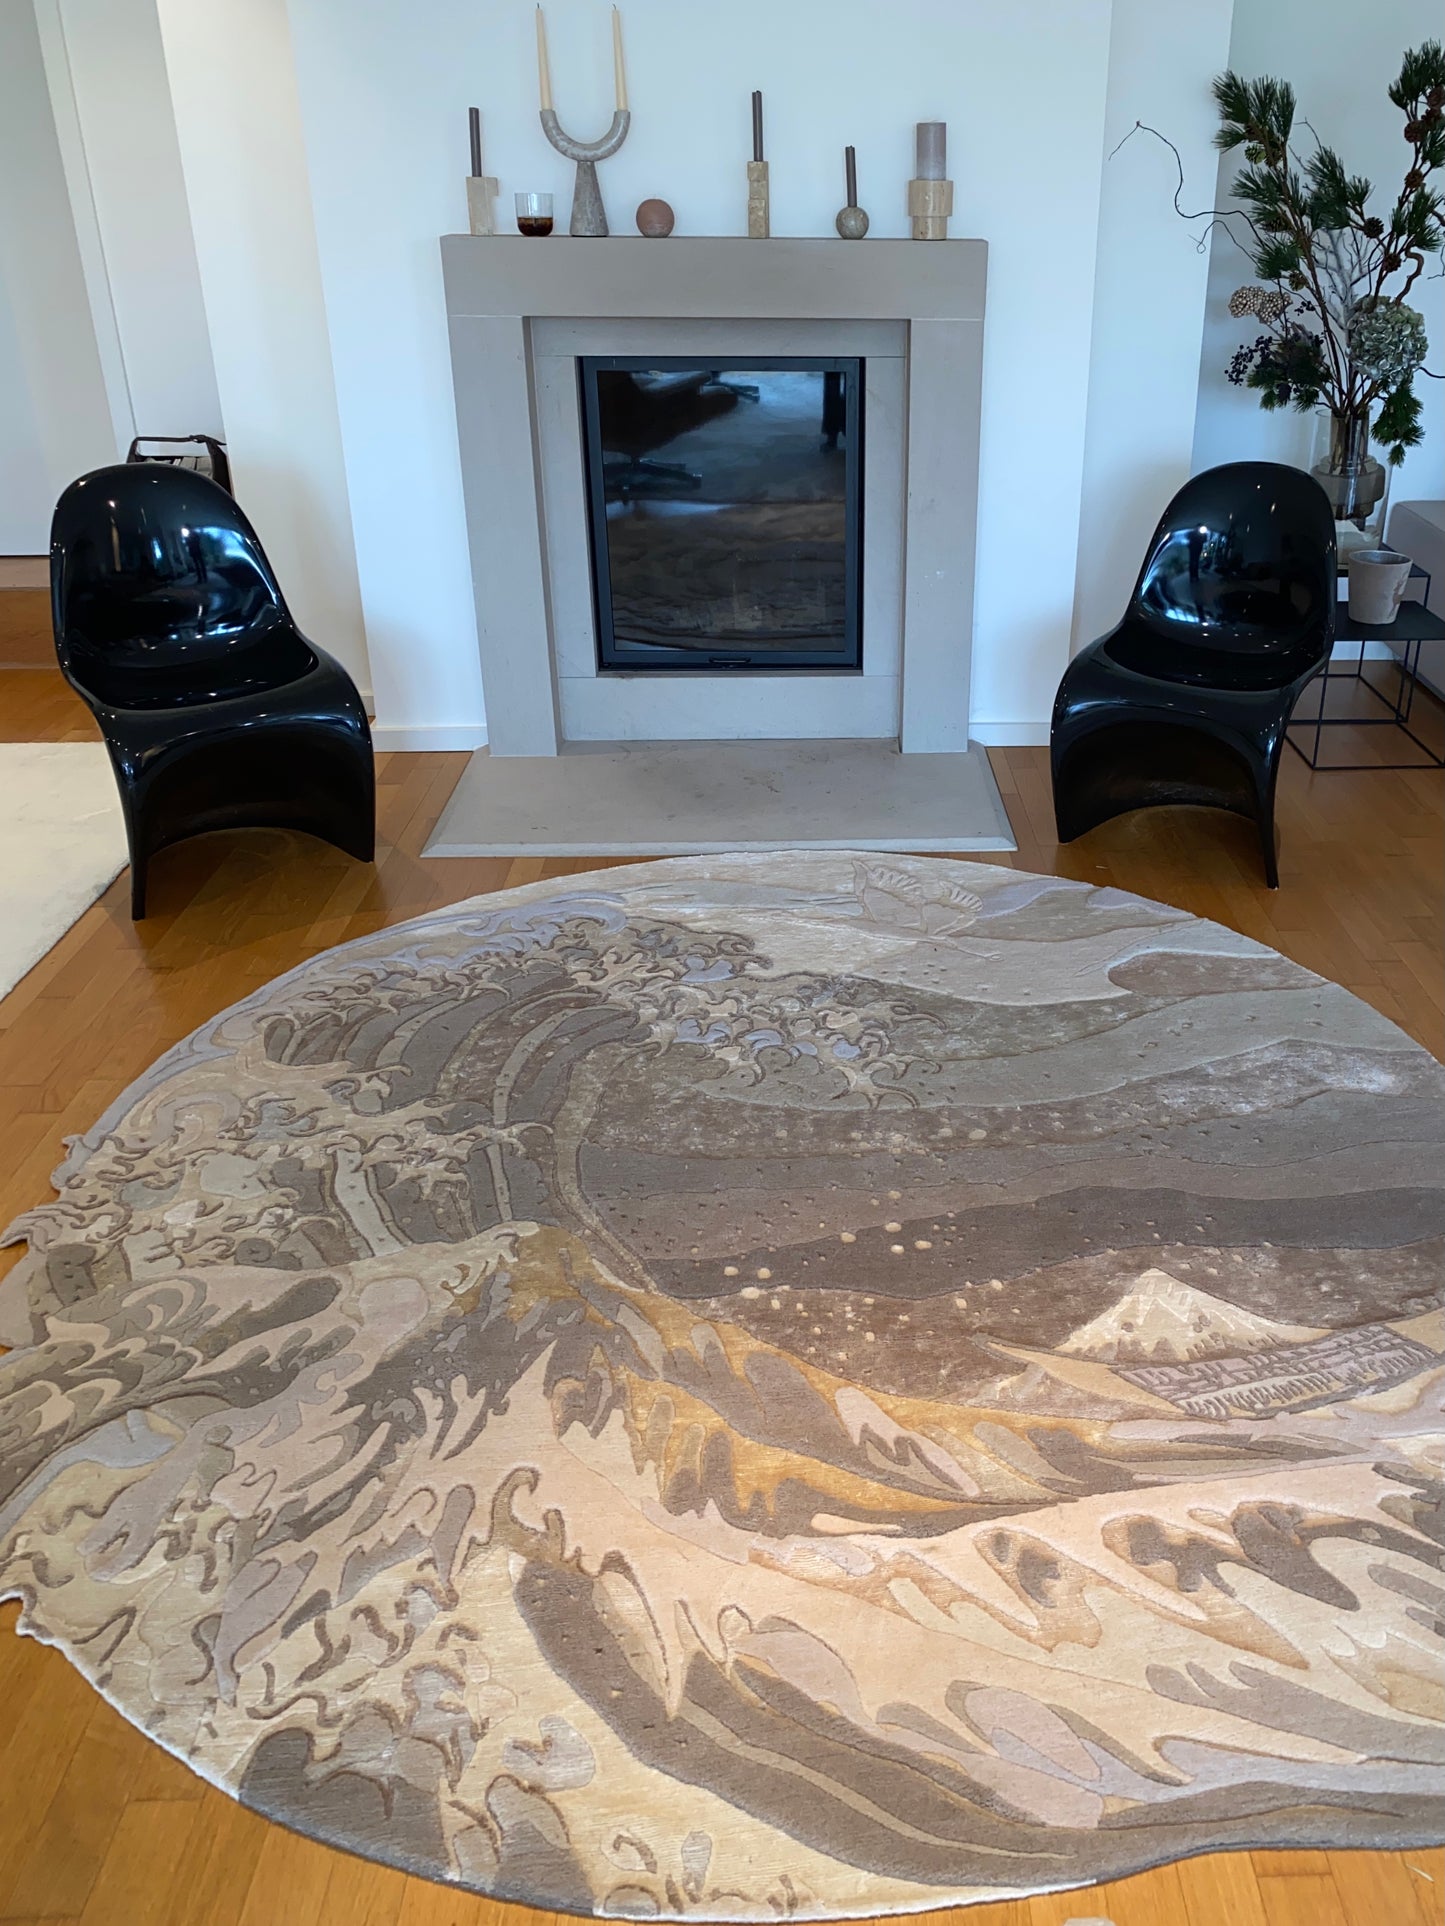 The great wave of Kanagawa - carpet art unique 200cm round - beige taupe gray - hand-knotted Nepal